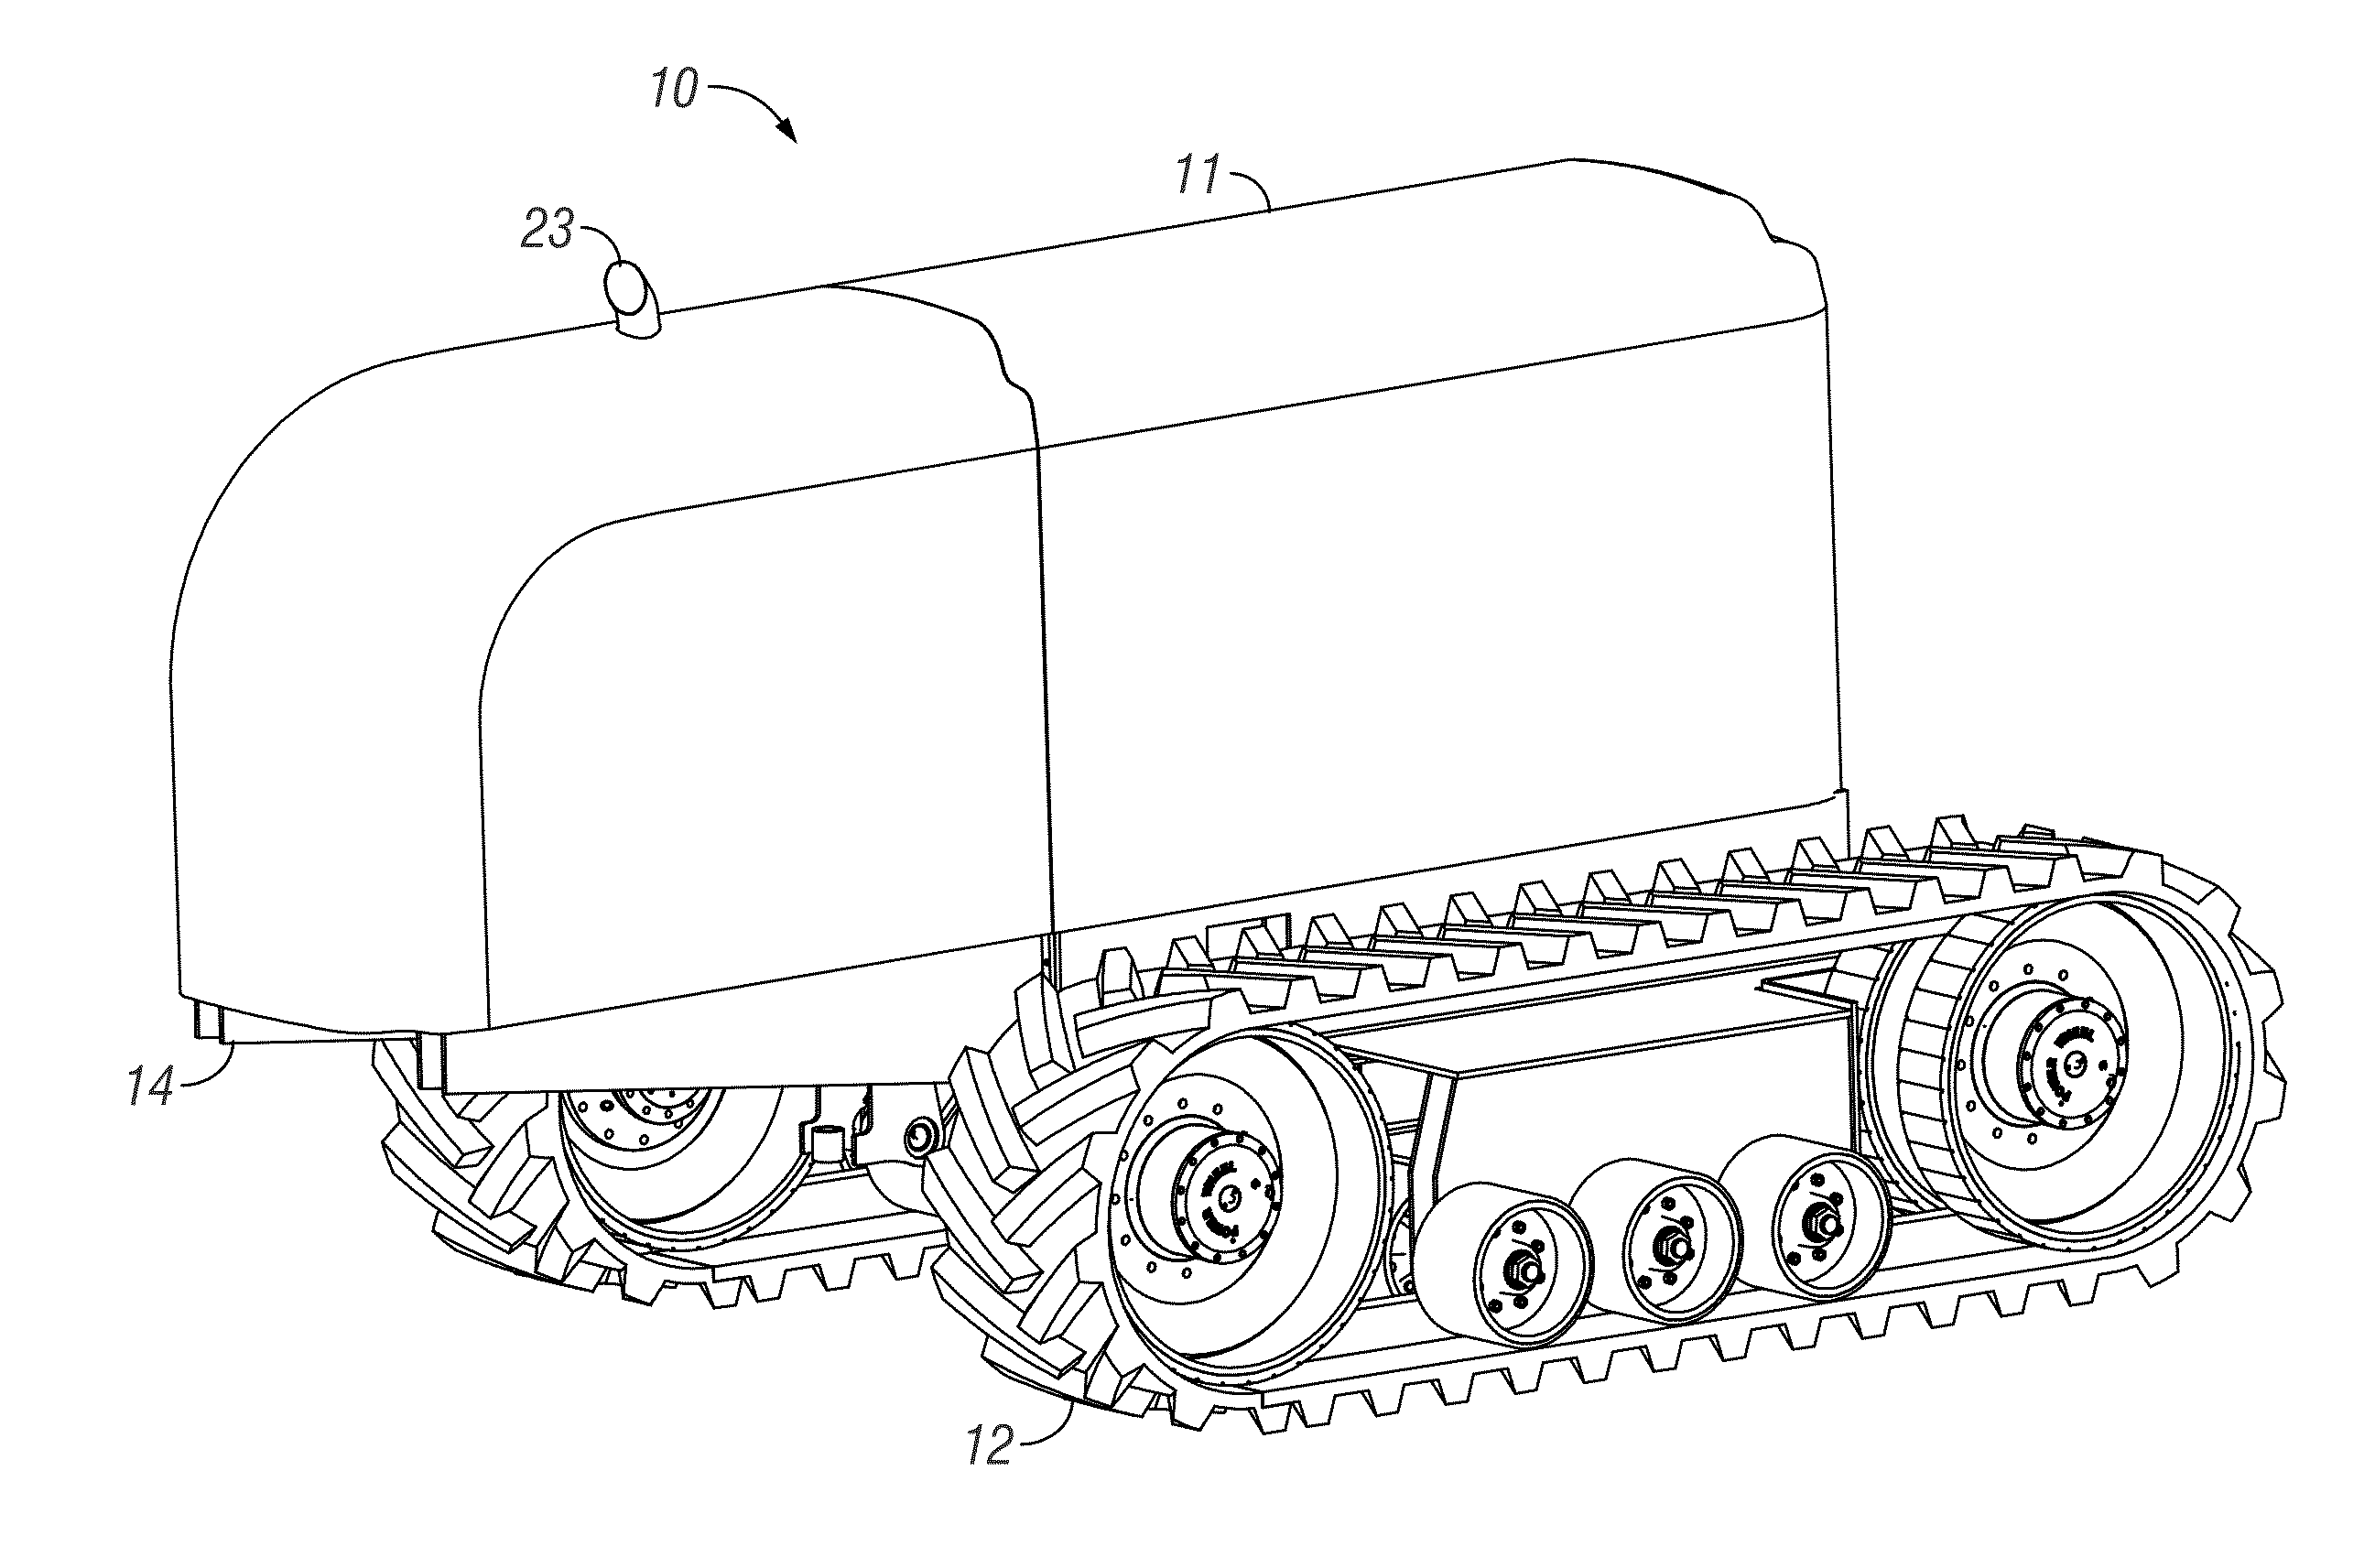 Autonomous systems, methods, and apparatus for ag based operations